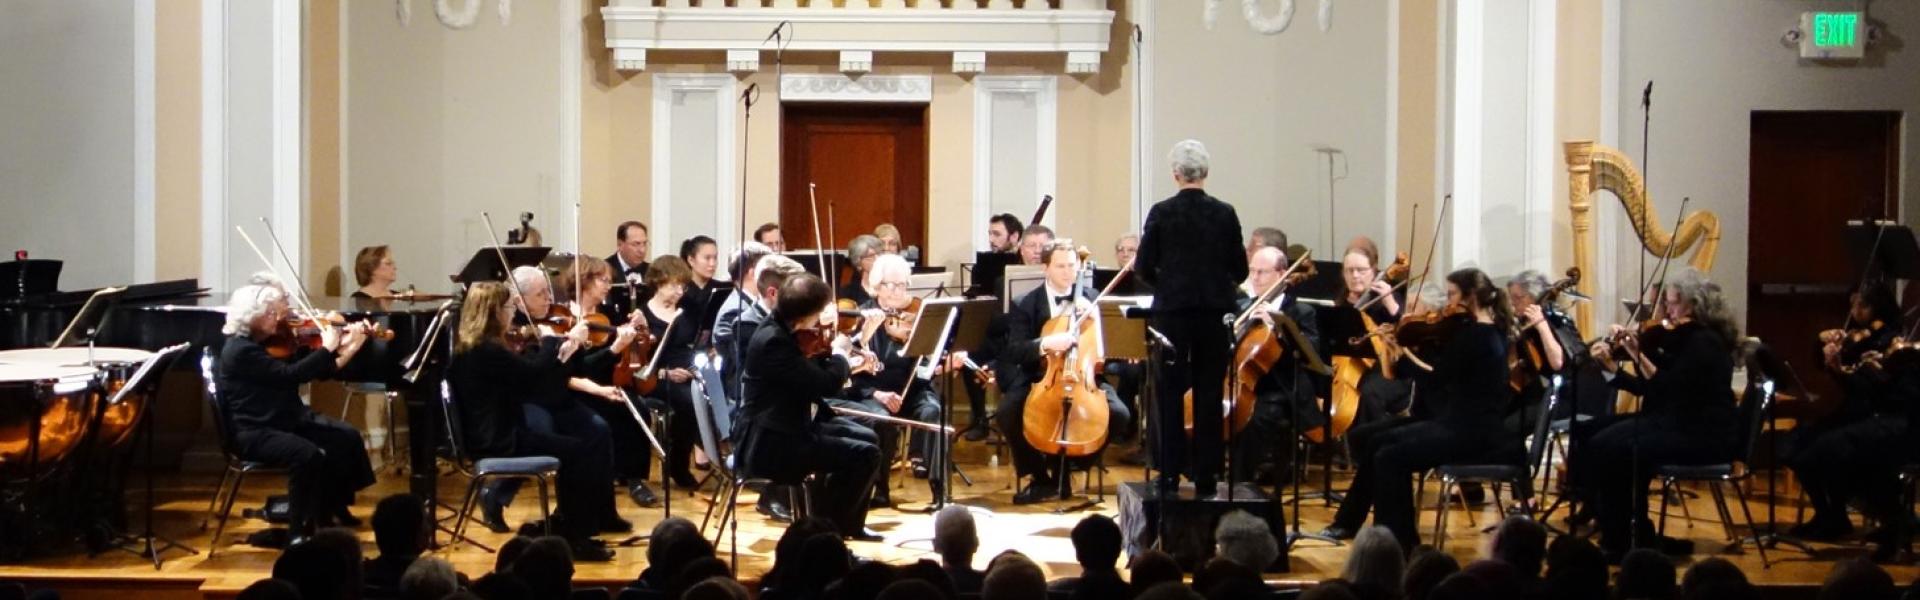 Mission Chamber Orchestra